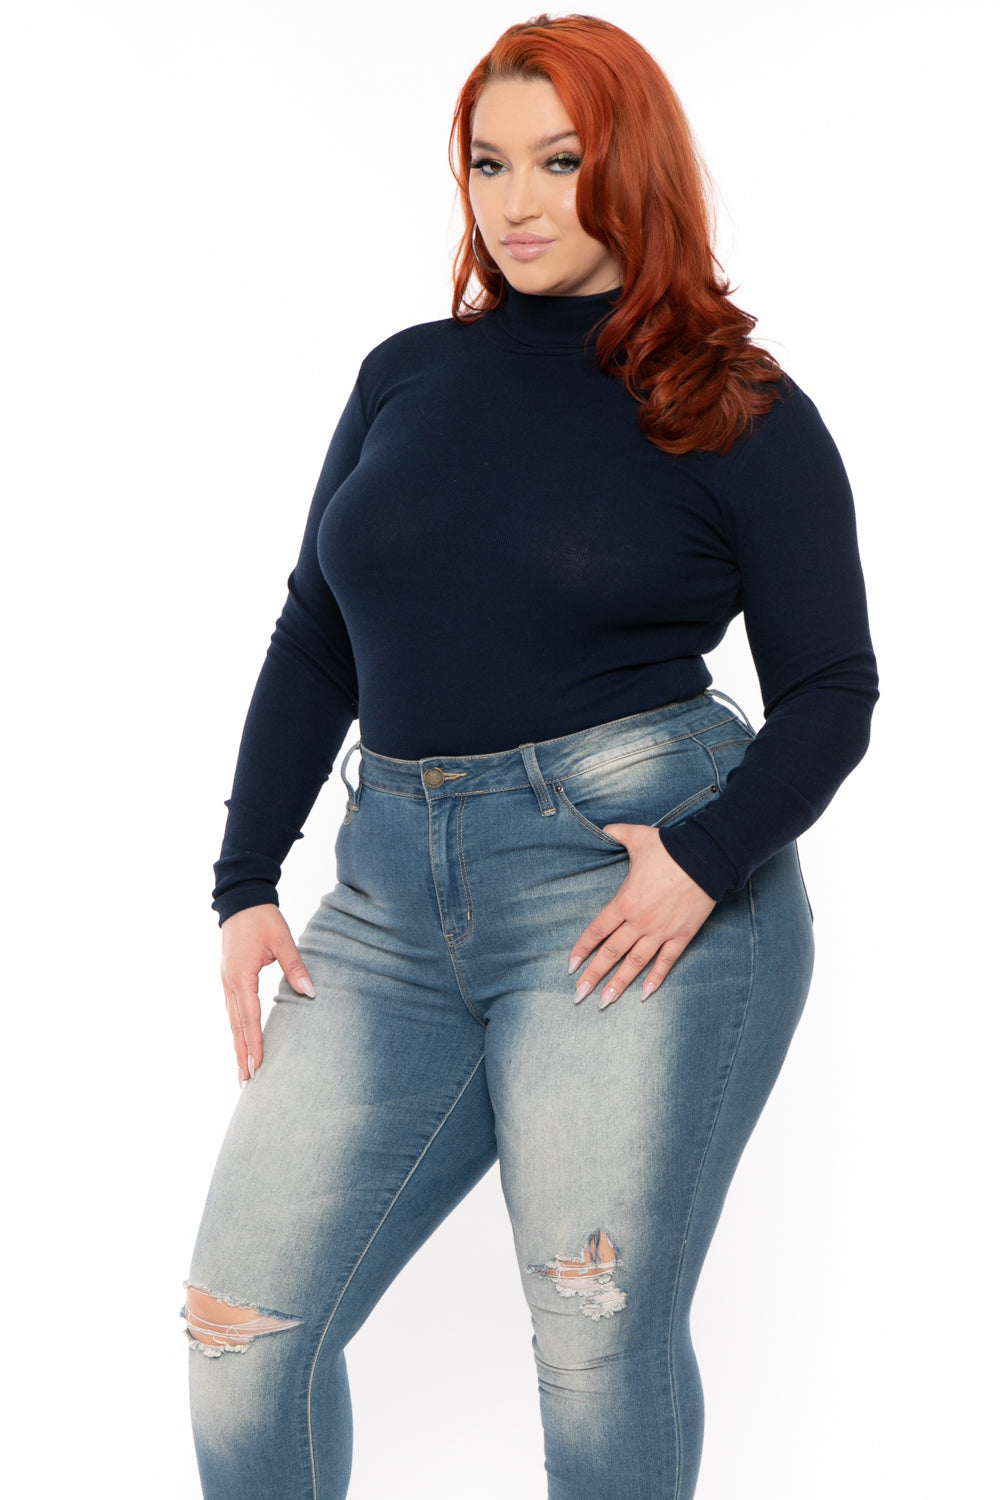 Ambiance Tops Plus Size Ribbed Turtleneck Top - Navy